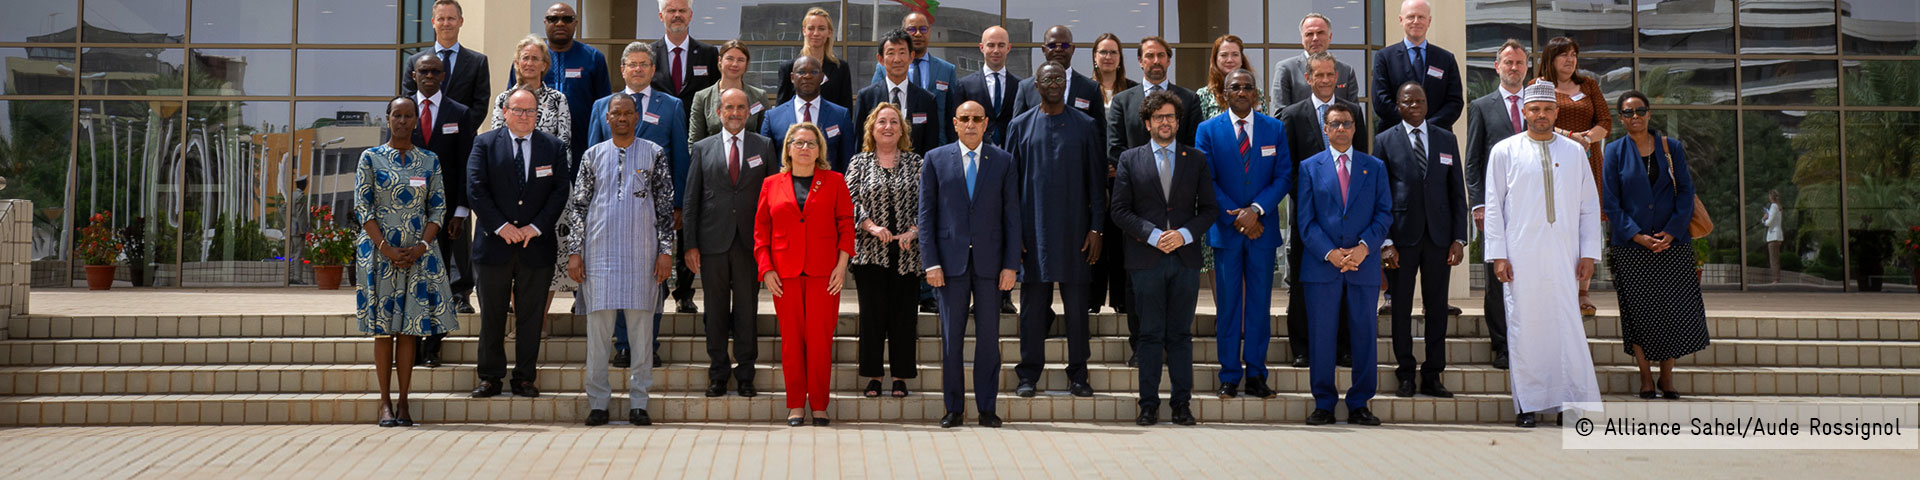 Sahel Alliance members stand for a photo with Svenja Schulze, the Mauritanian President and the Mauritanian Minister of Economy.